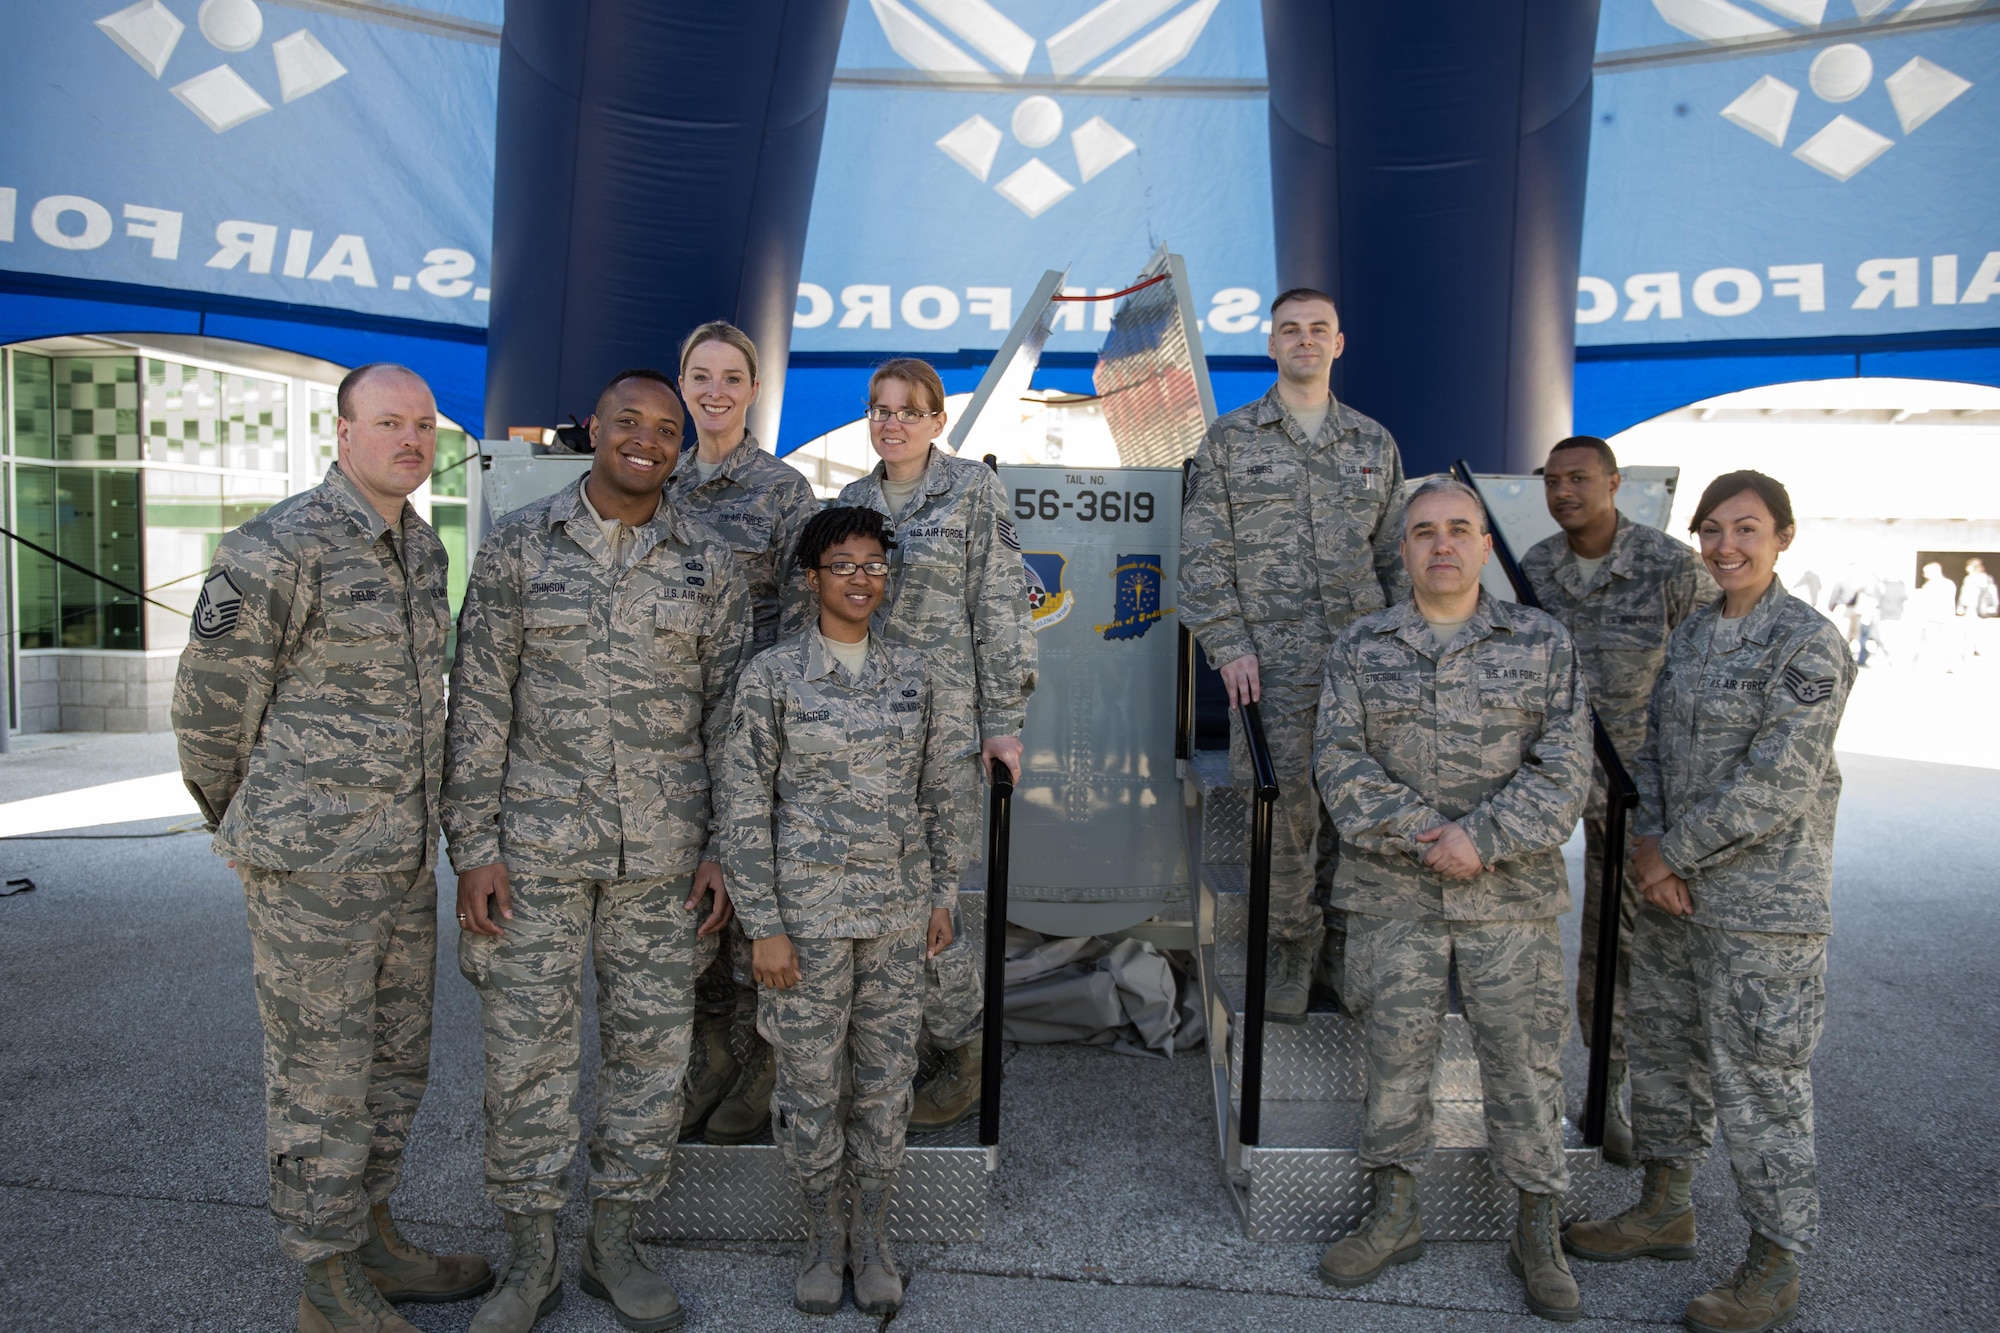 During the 2016 Indiana Woman Veterans’ Conference in Indianapolis, April 15, 2016 eight Airmen pose for a photo after setting upset Grissom’s interactive flight deck and boom pod displays. In the photo are:(first row left to right) Master Sgt. Corey Fields, 434th Maintenance Squadron structural maintenance supervisor; Staff Sgt. Bernard Johnson, 434th Air Refueling Wing reserve pay specialist; Senior Airman Monique Hagger, 434th ARW reserve pay specialist; Senior Master Sgt. Douglas Stogsdill, 434th MXS fabrications flight chief; Staff Sgt. Abigail Wakefield, 434th MXS nondestructive inspection specialist; (second row left to right) Master Sgt. Deborah Sweet, 434th MXG unit training specialist; Tech. Sgt. Cathleen Castleberry, 434th Maintenance Operations Flight plans and scheduling specialist; Master Sgt. Joseph Hubbs, 434th MOF production controller and Staff Sgt. Justin Simpkins, 434th ARW financial services specialist. (U.S. Air Force photo/Tech. Sgt. Benjamin Mota)